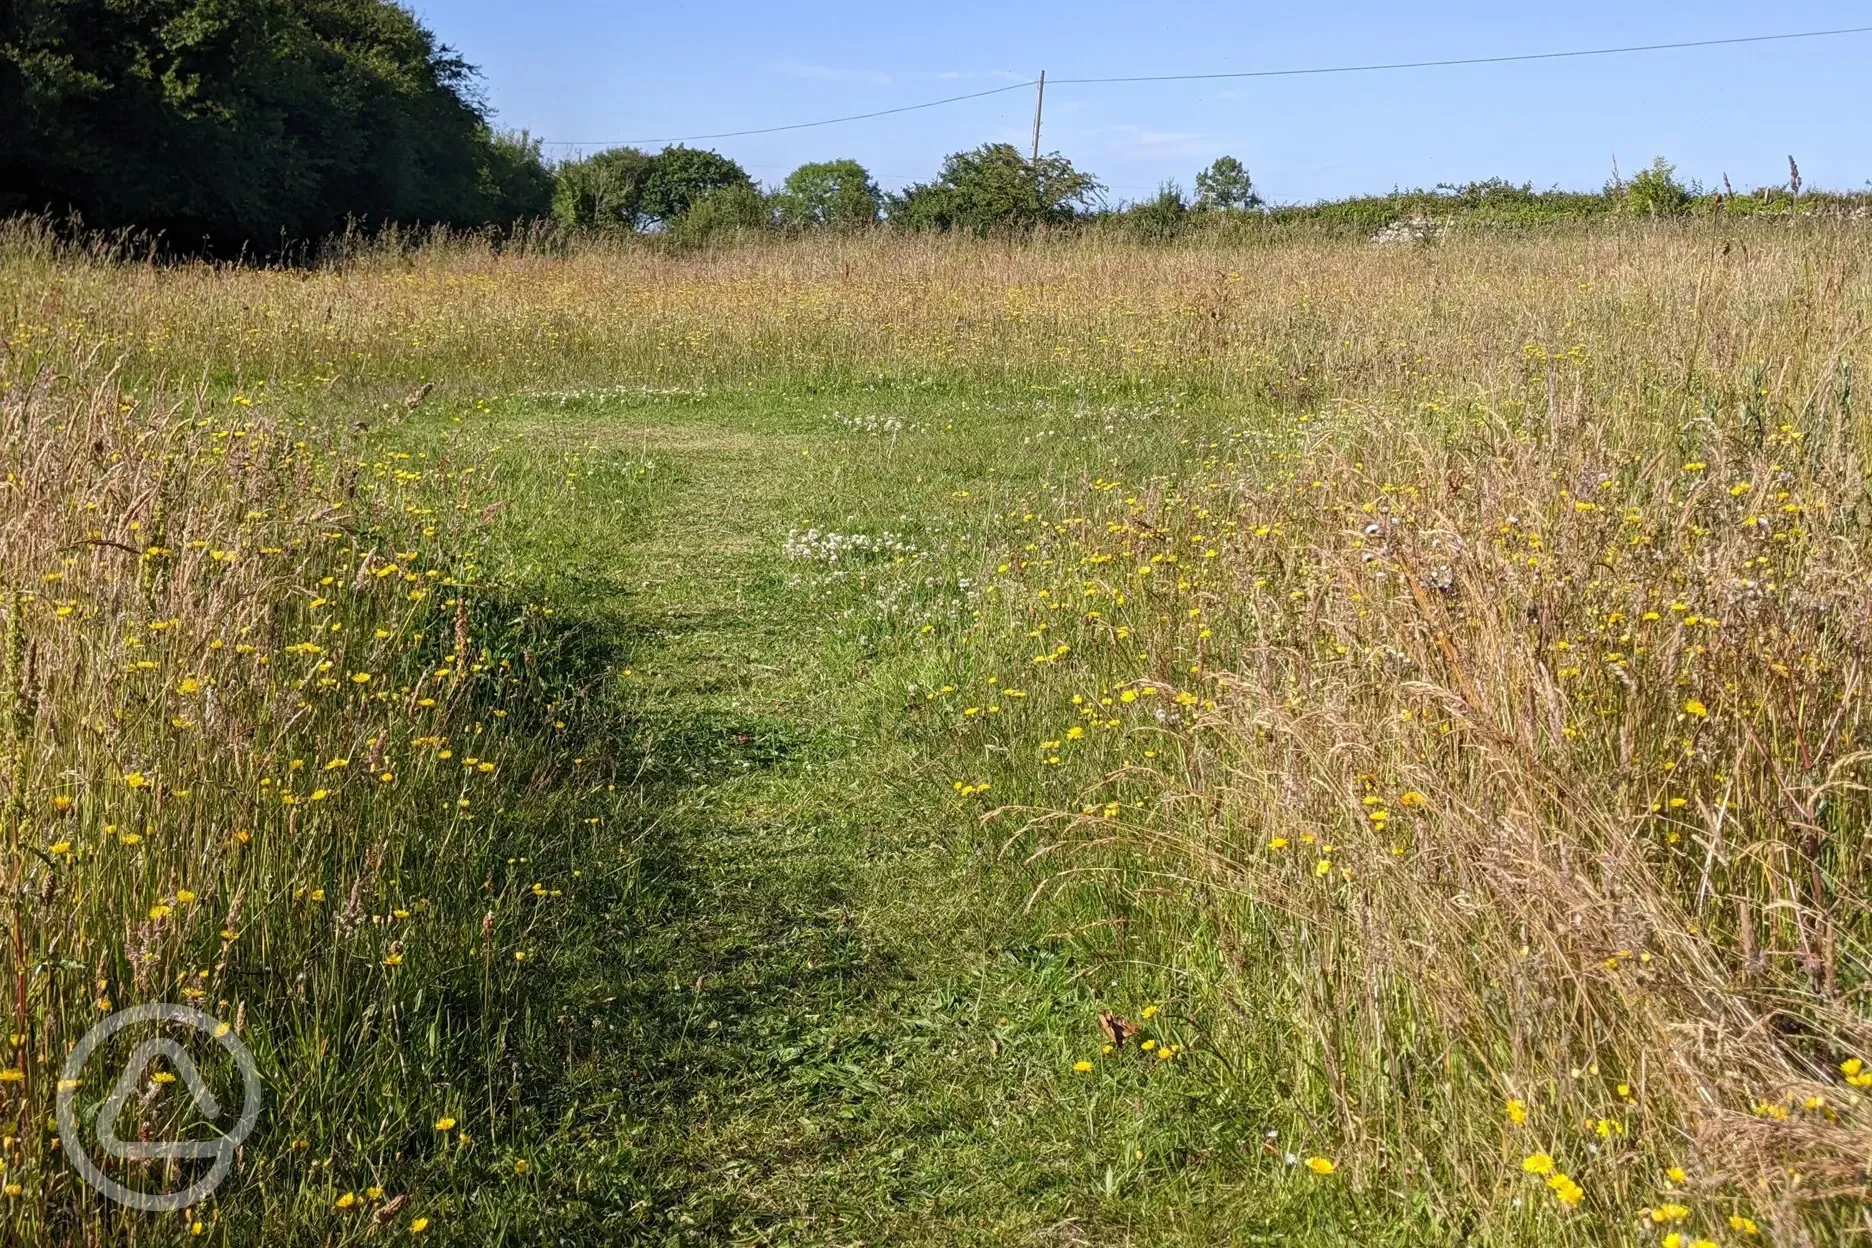 Pitches cut into the meadow